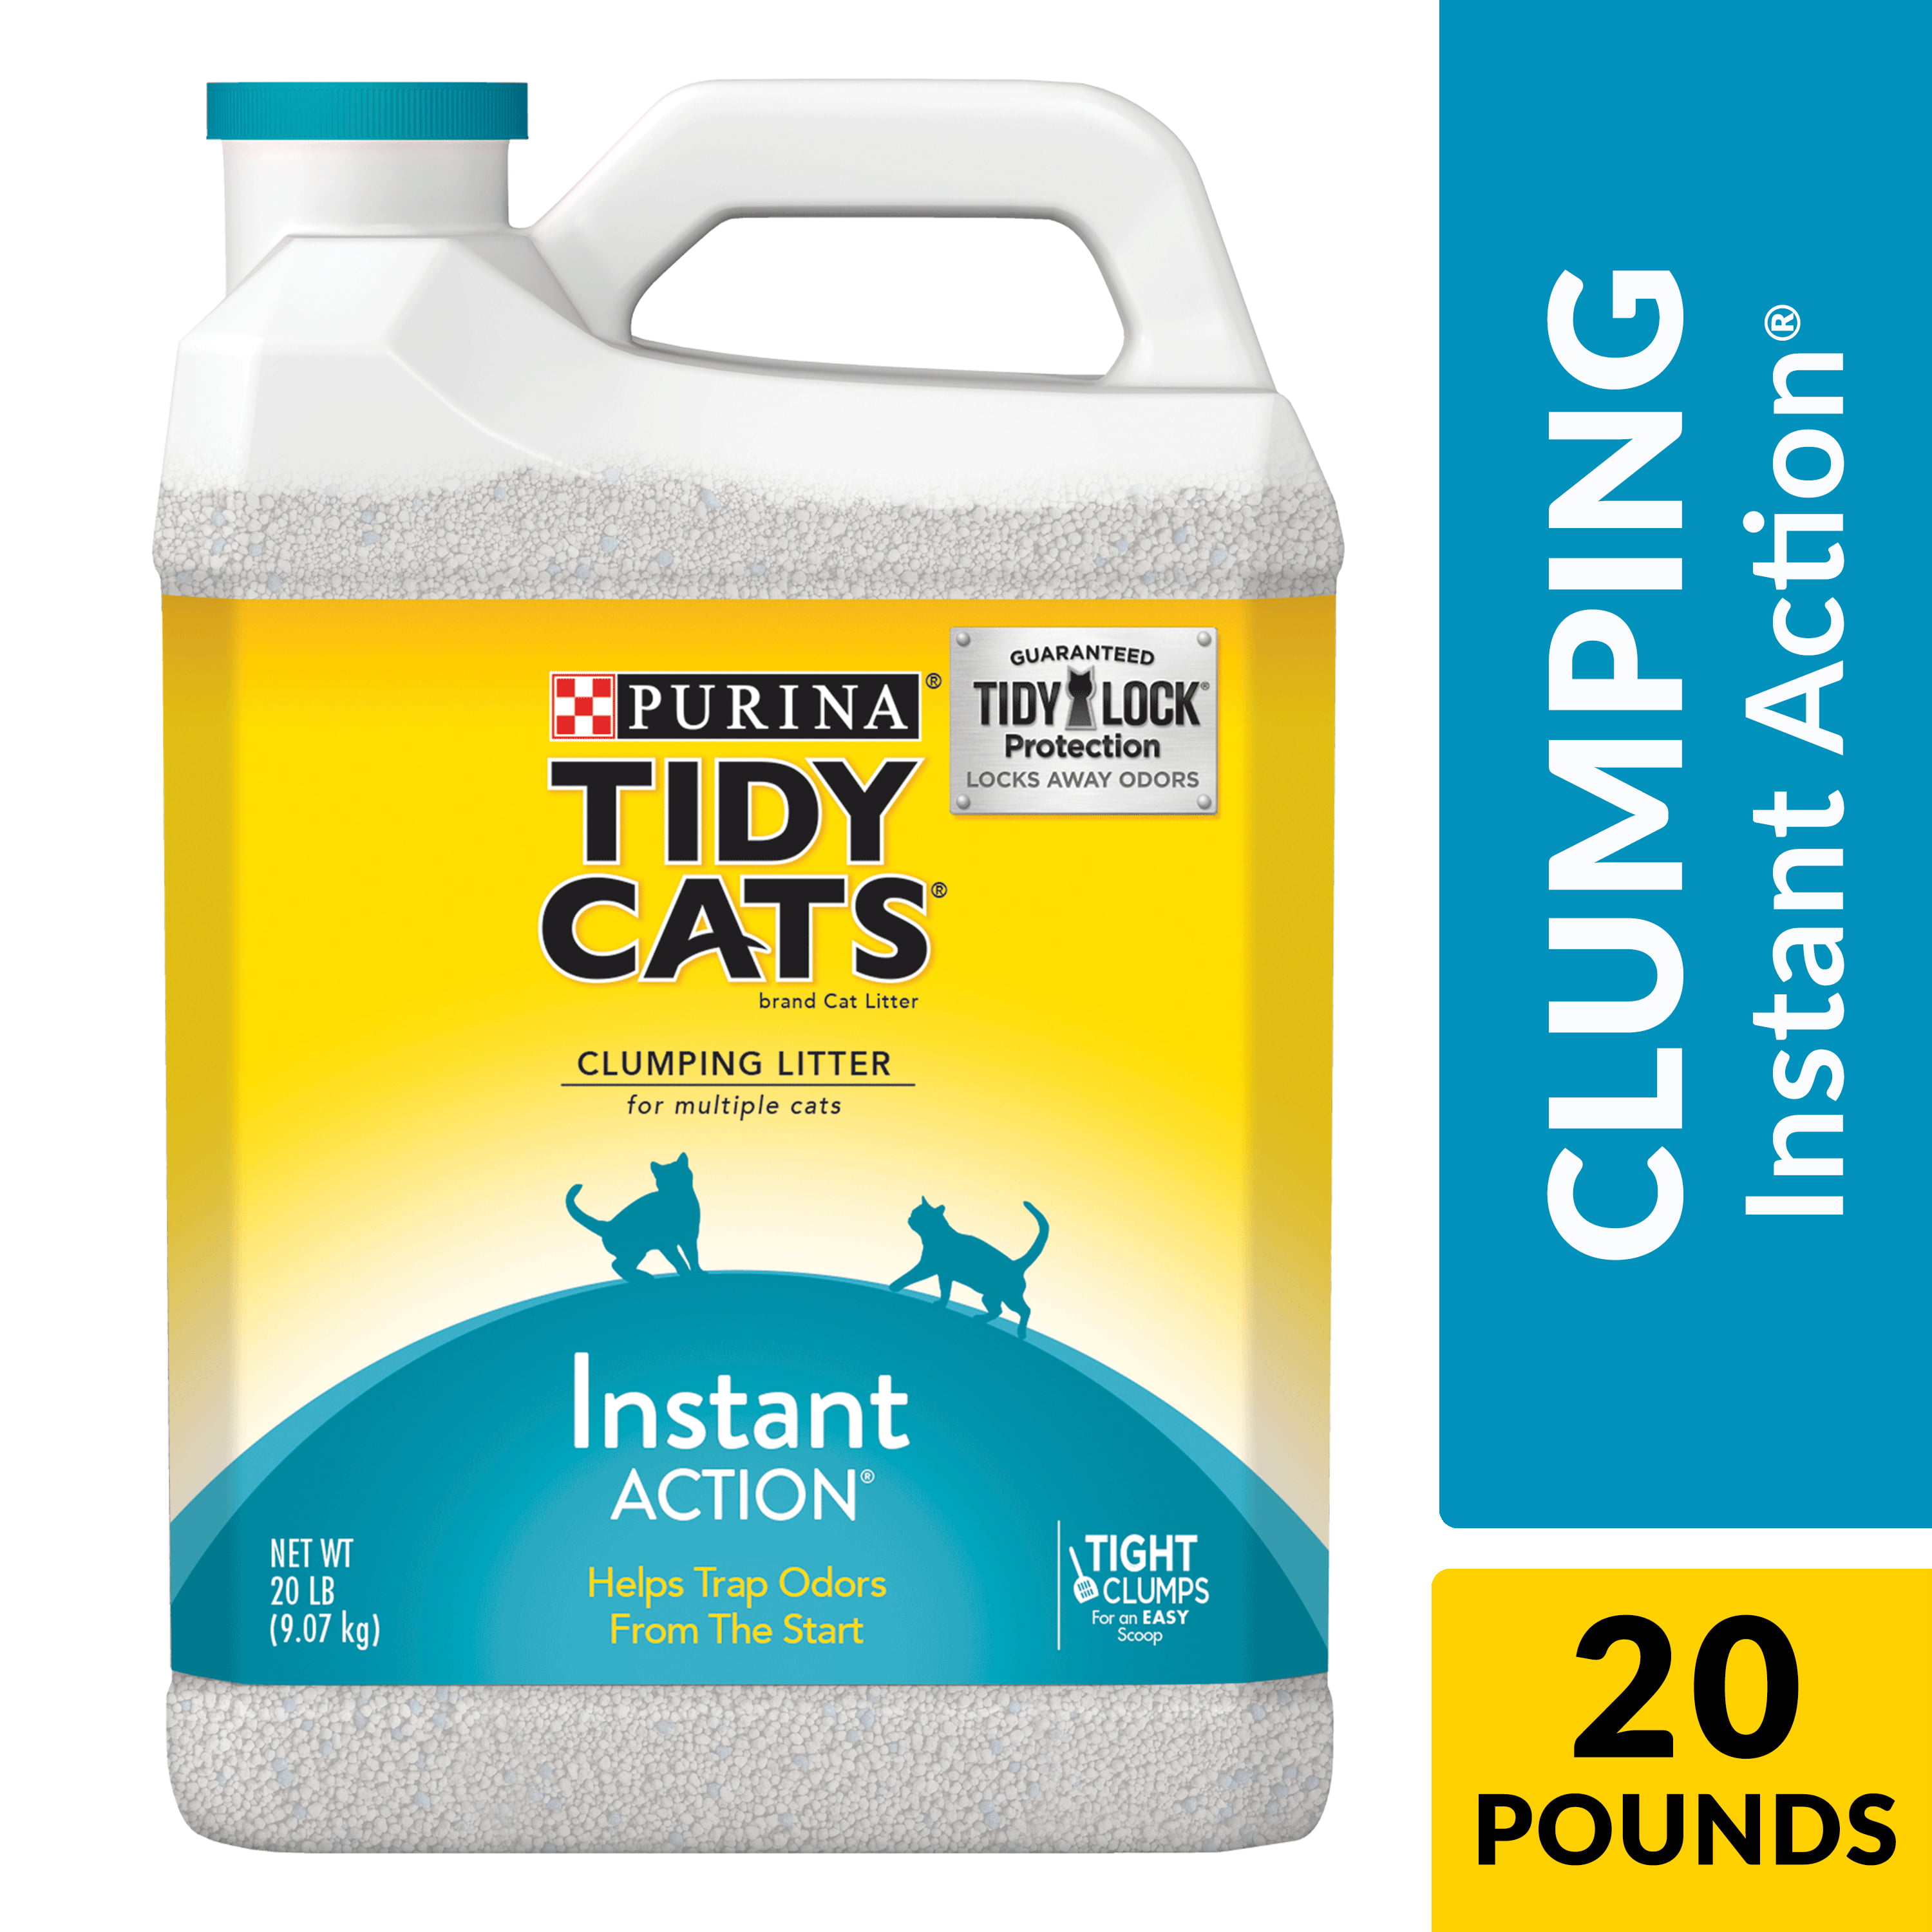 Purina Tidy Cats Clumping Cat Litter, Instant Action Multi Cat Litter